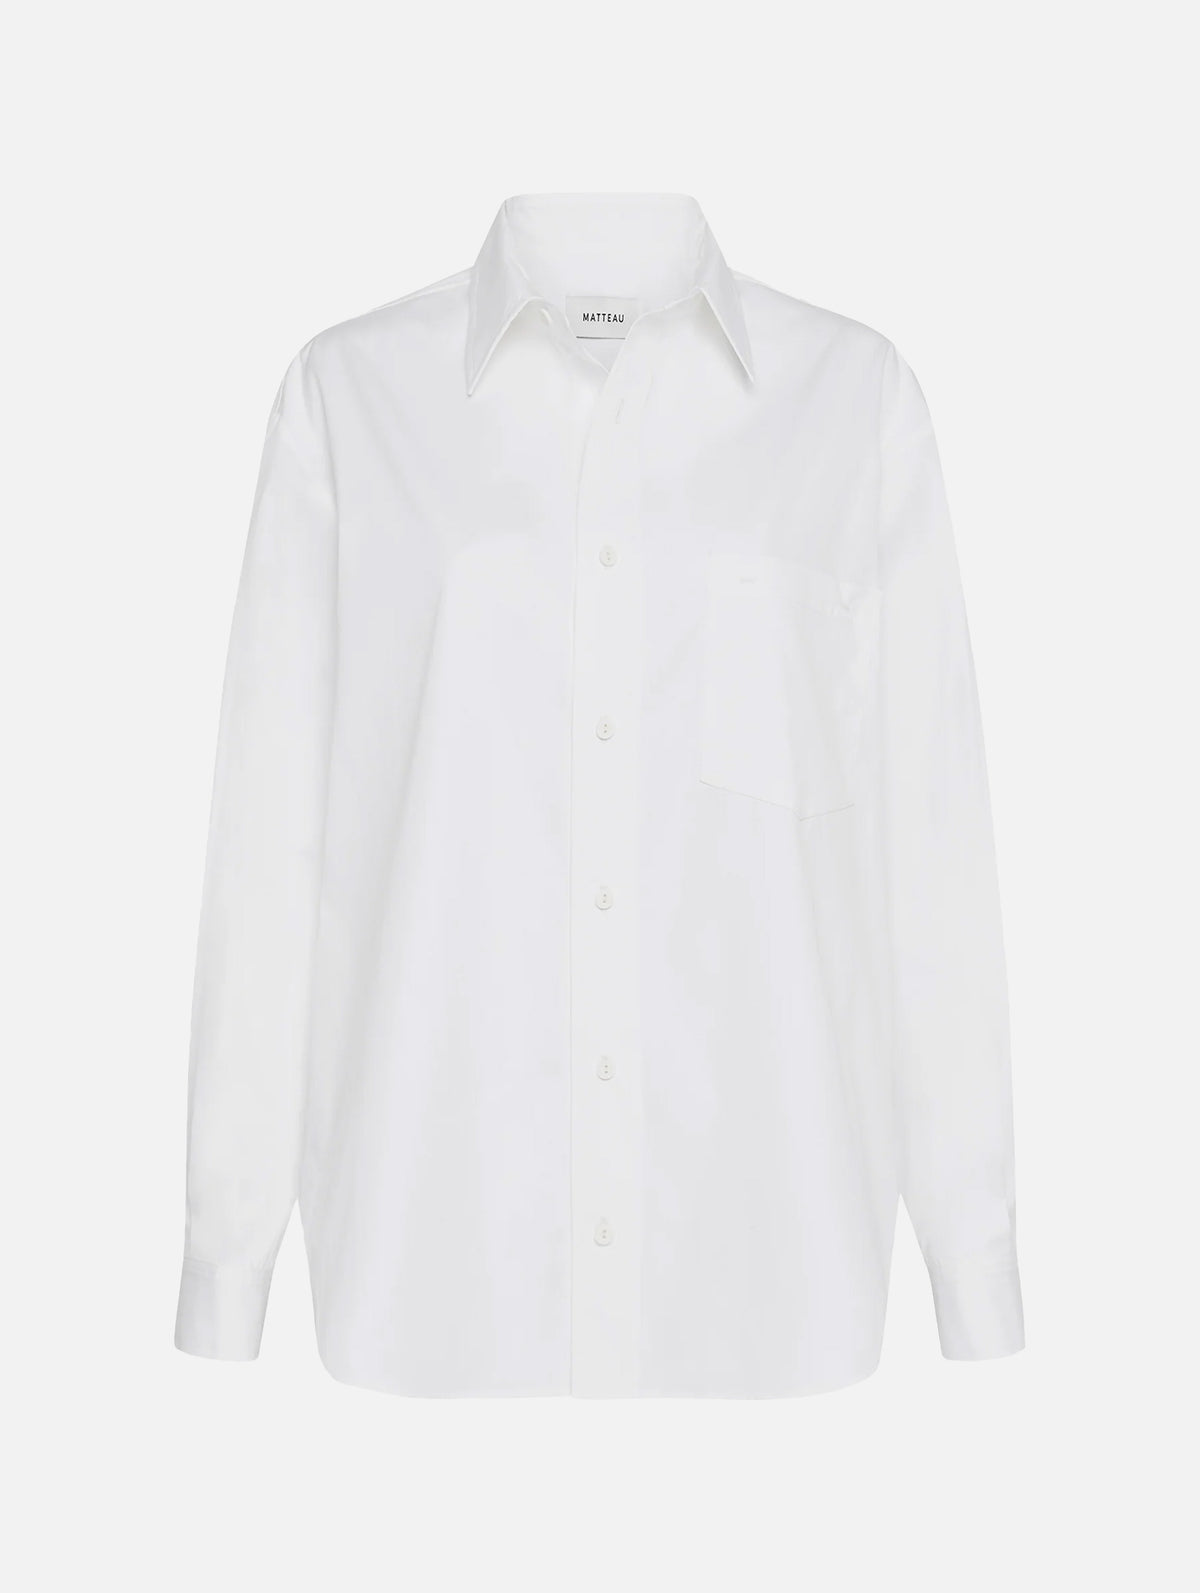 Classic Pocket Shirt in White